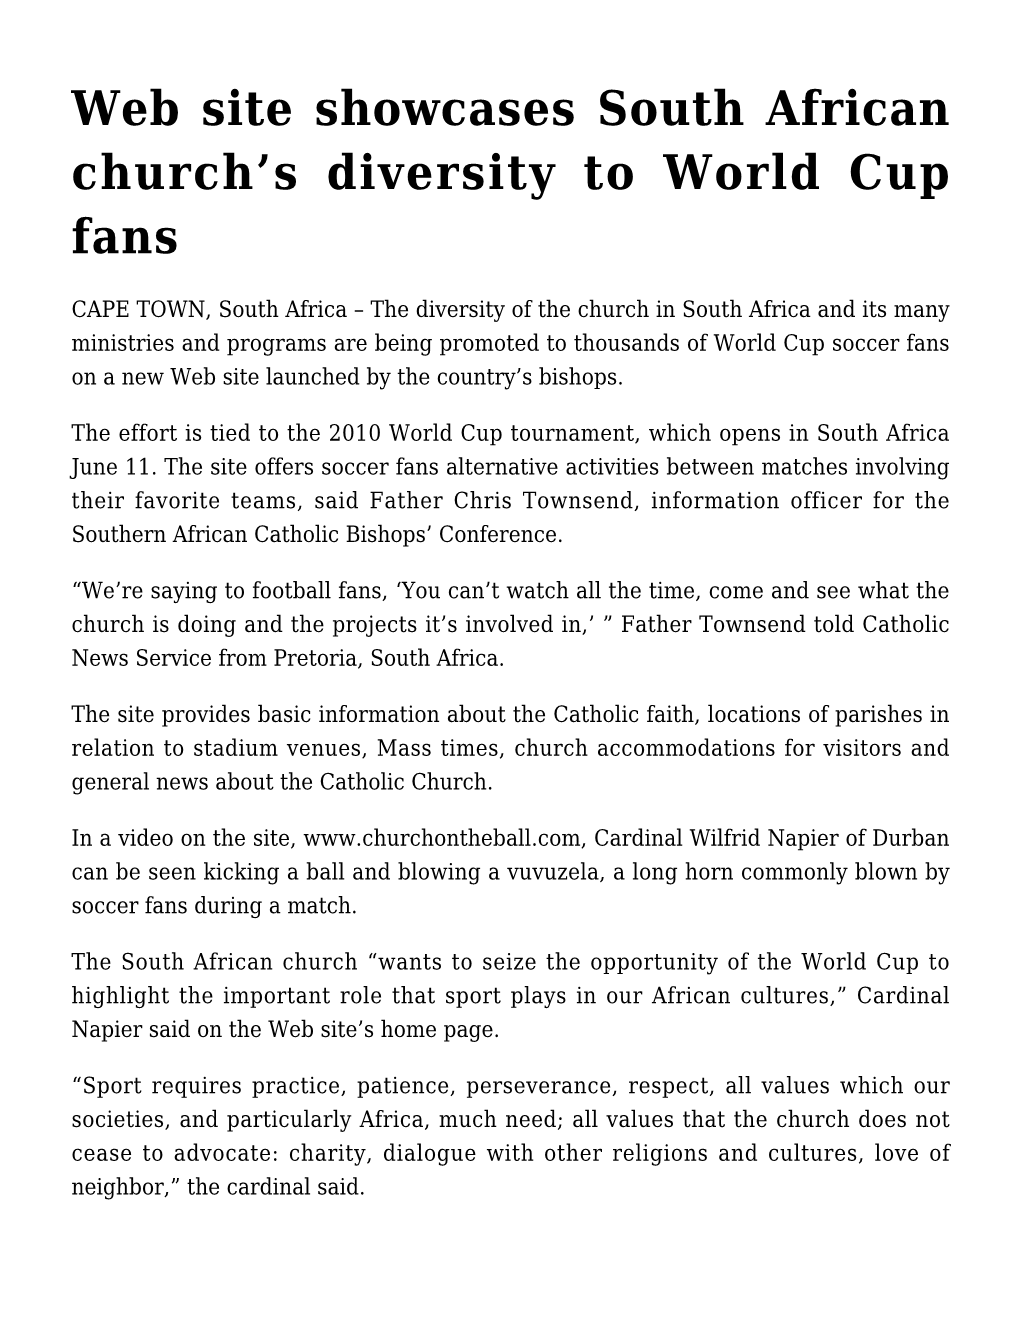 Web Site Showcases South African Church's Diversity to World Cup Fans